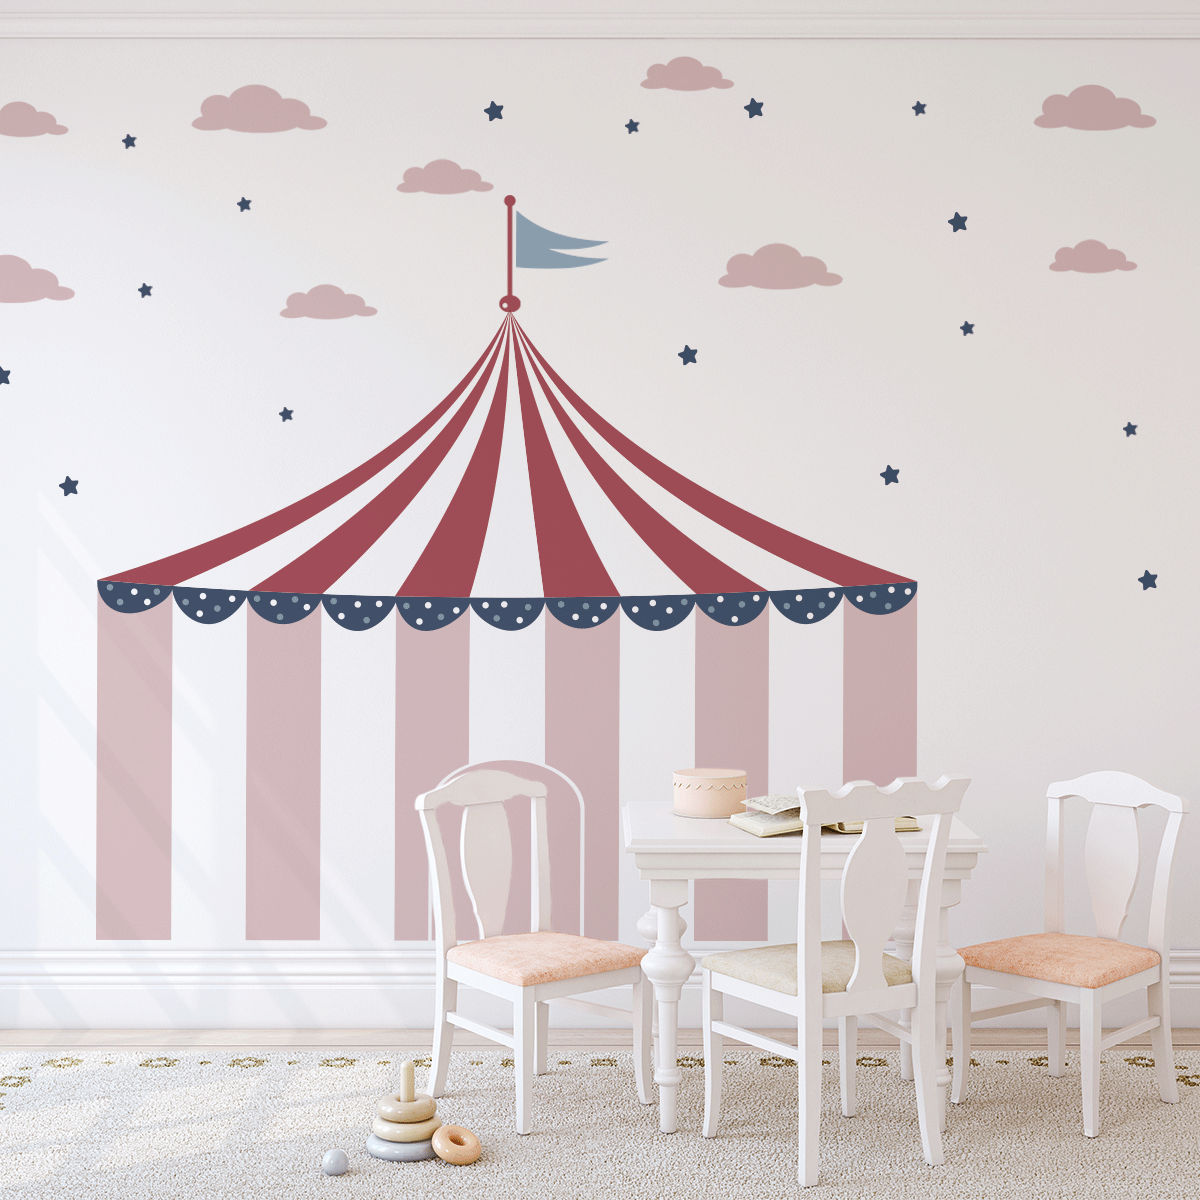 Circus wall stickers - Up, up and away (pink)